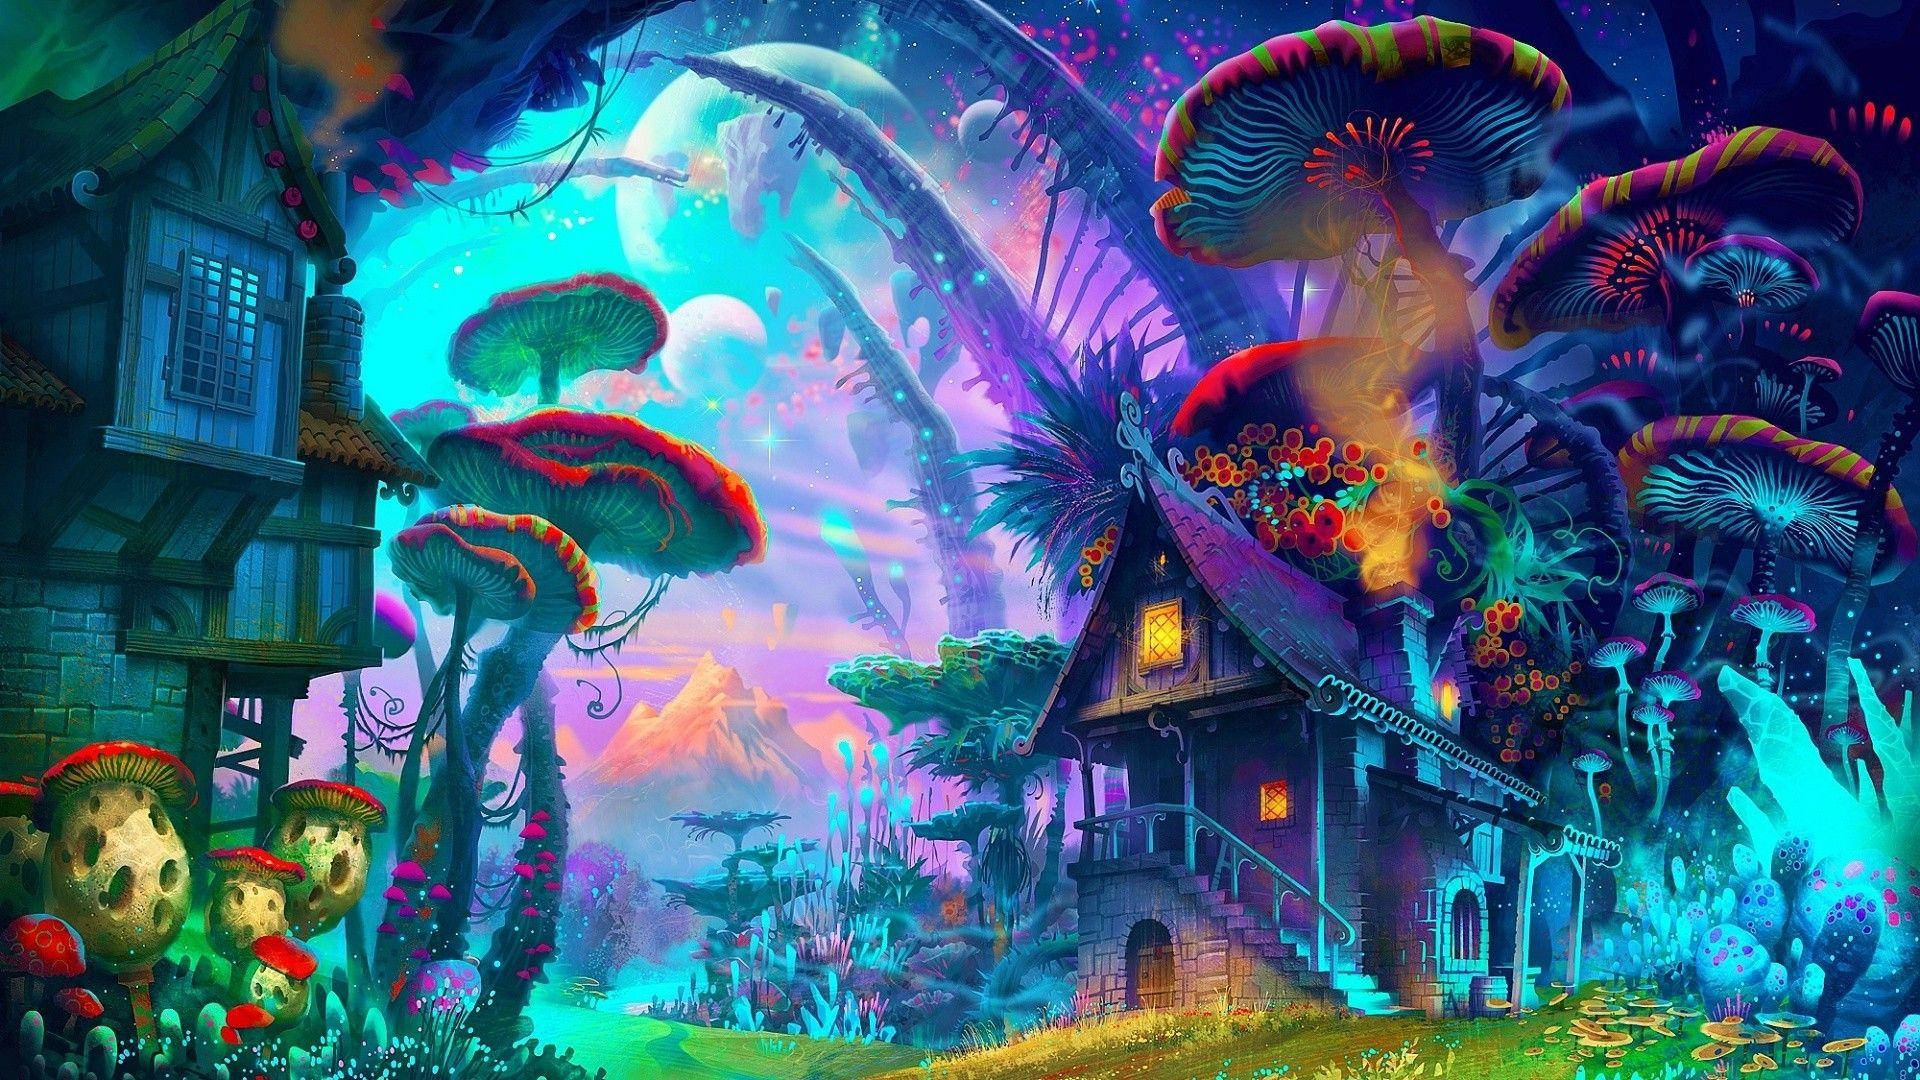 Photo  "Experience a mind-altering journey with psychedelic mushrooms" Wallpaper